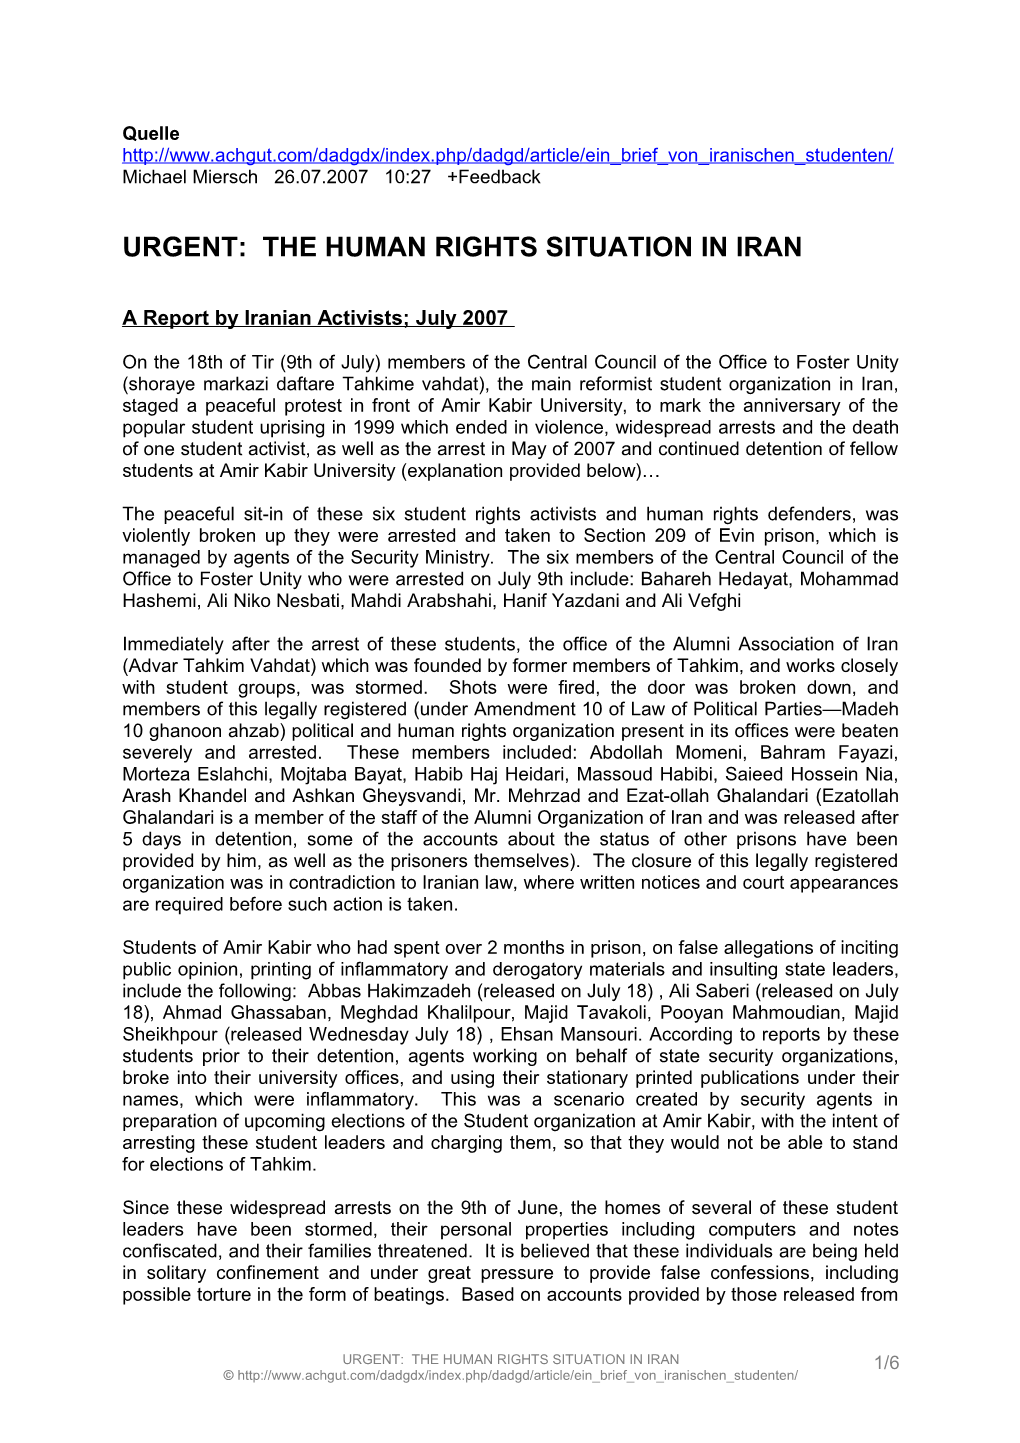 Urgent: the Human Rights Situation in Iran